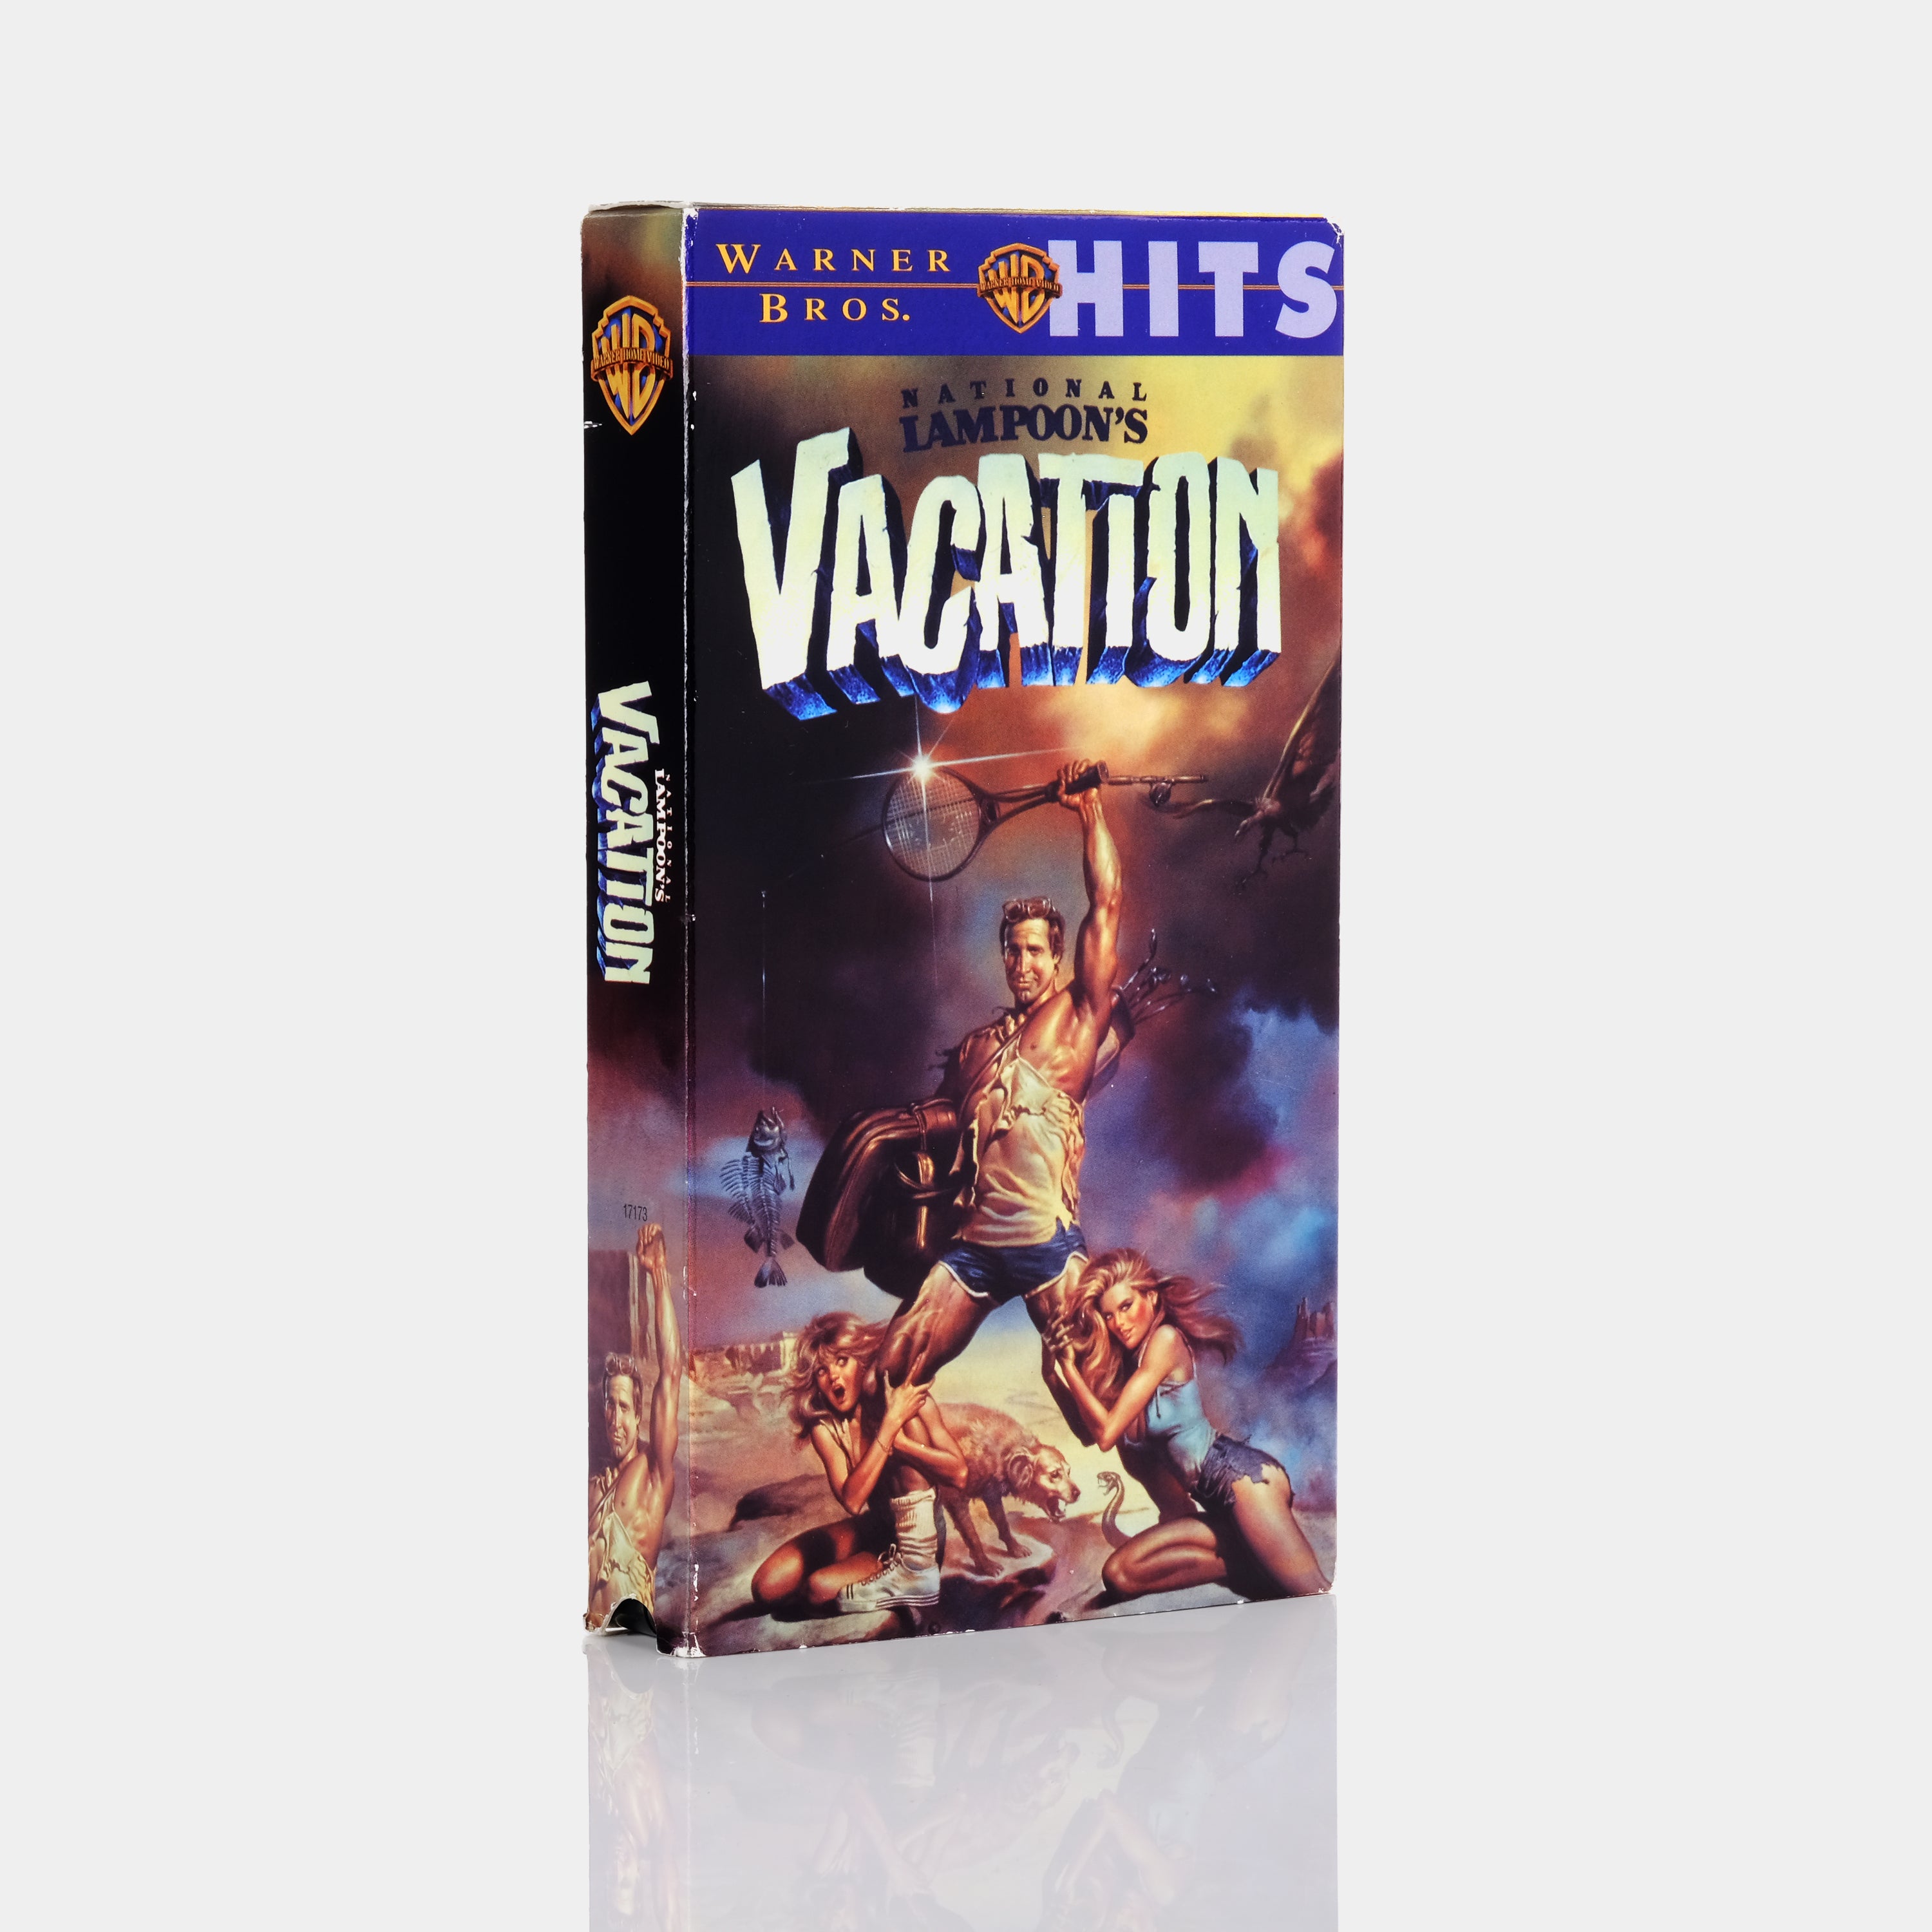 National Lampoon's Vacation VHS Tape